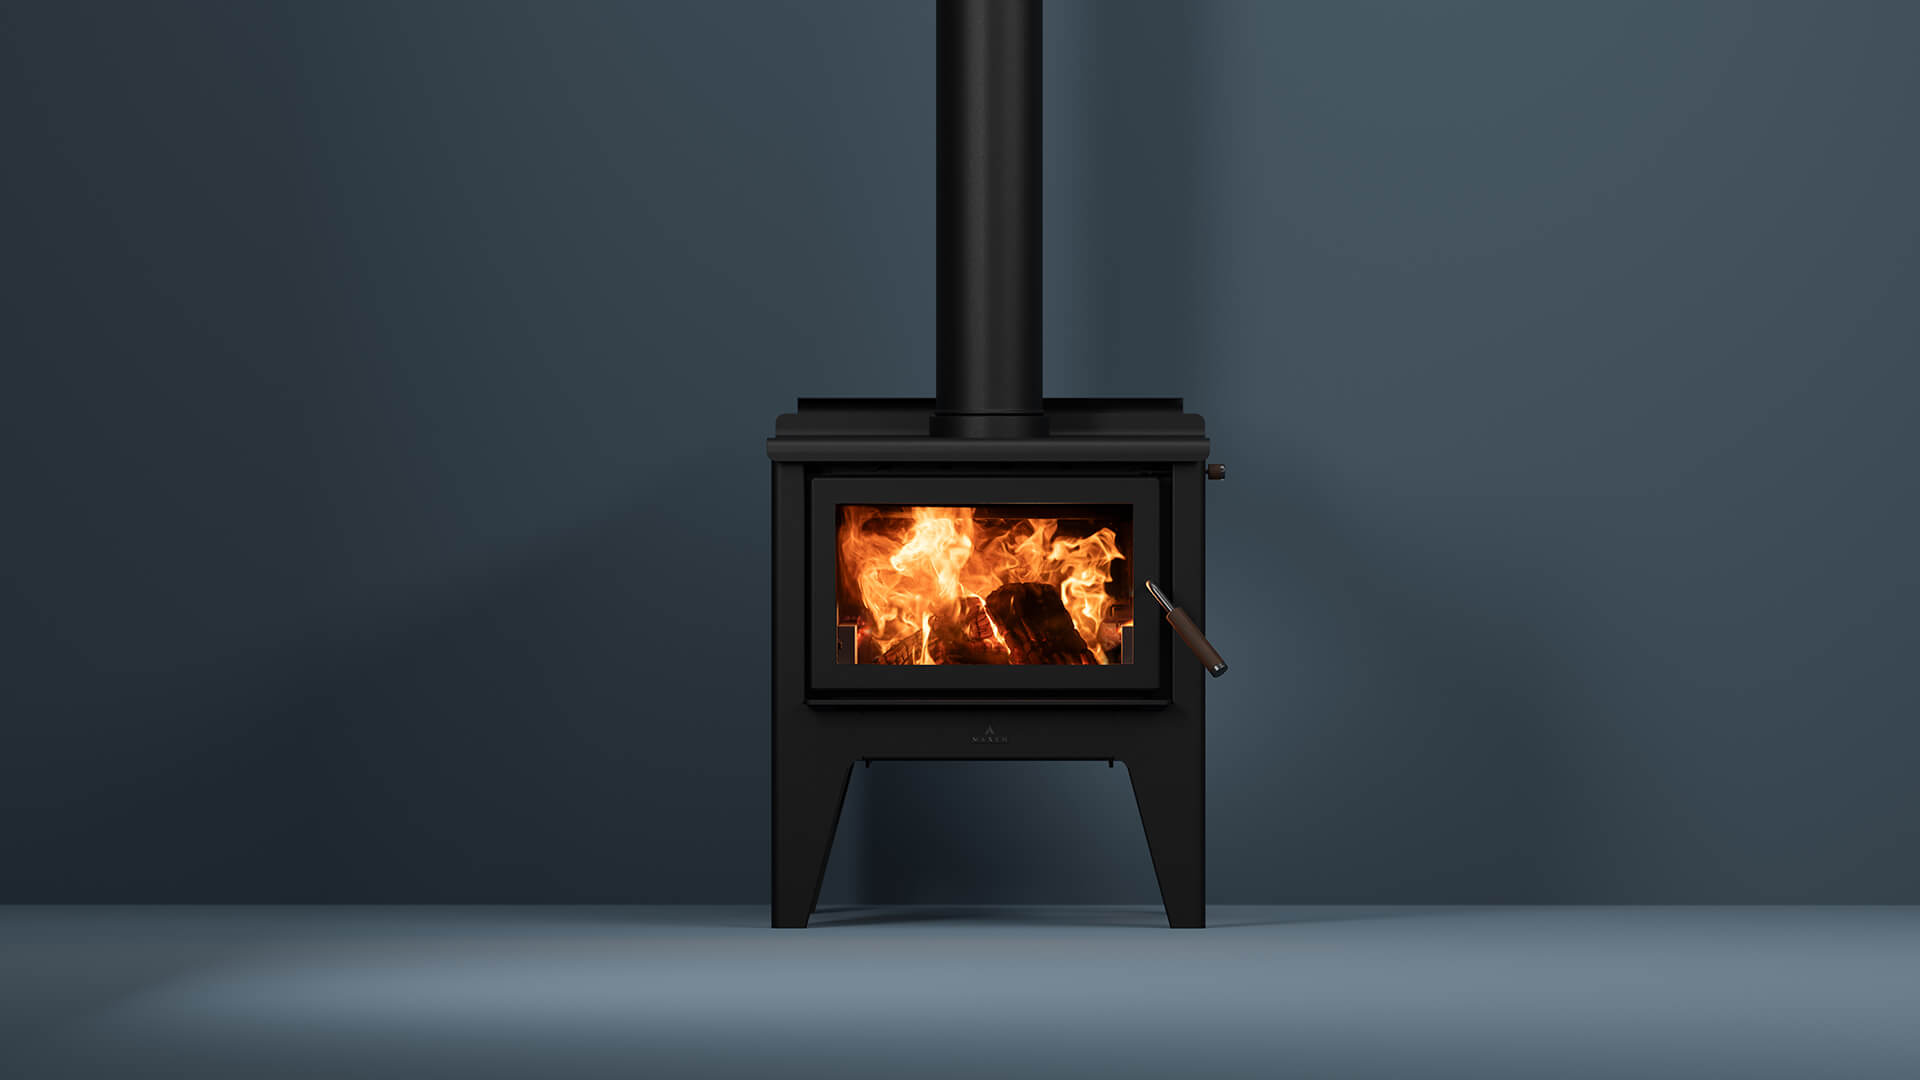 Maxen Kinmont 350 with Legs Base Wood Fireplace in navy coloured room